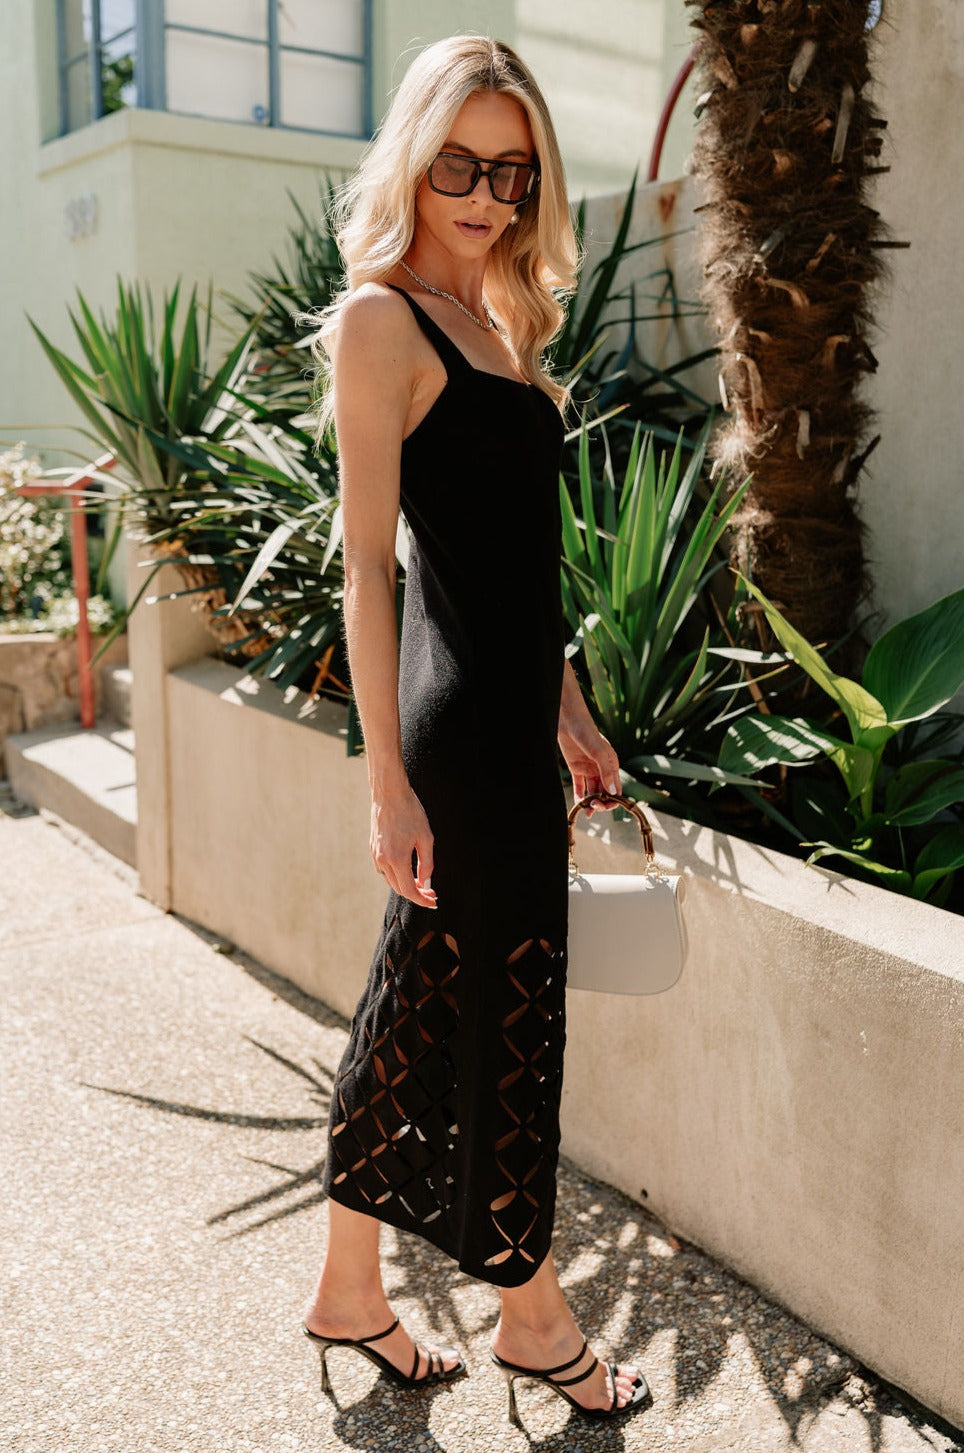 Full body side view of female model wearing the Mila Black Knit Cut-Out Trim Midi Dress which features Black Knit Fabric, Square Neckline, Straps and Cutout Details